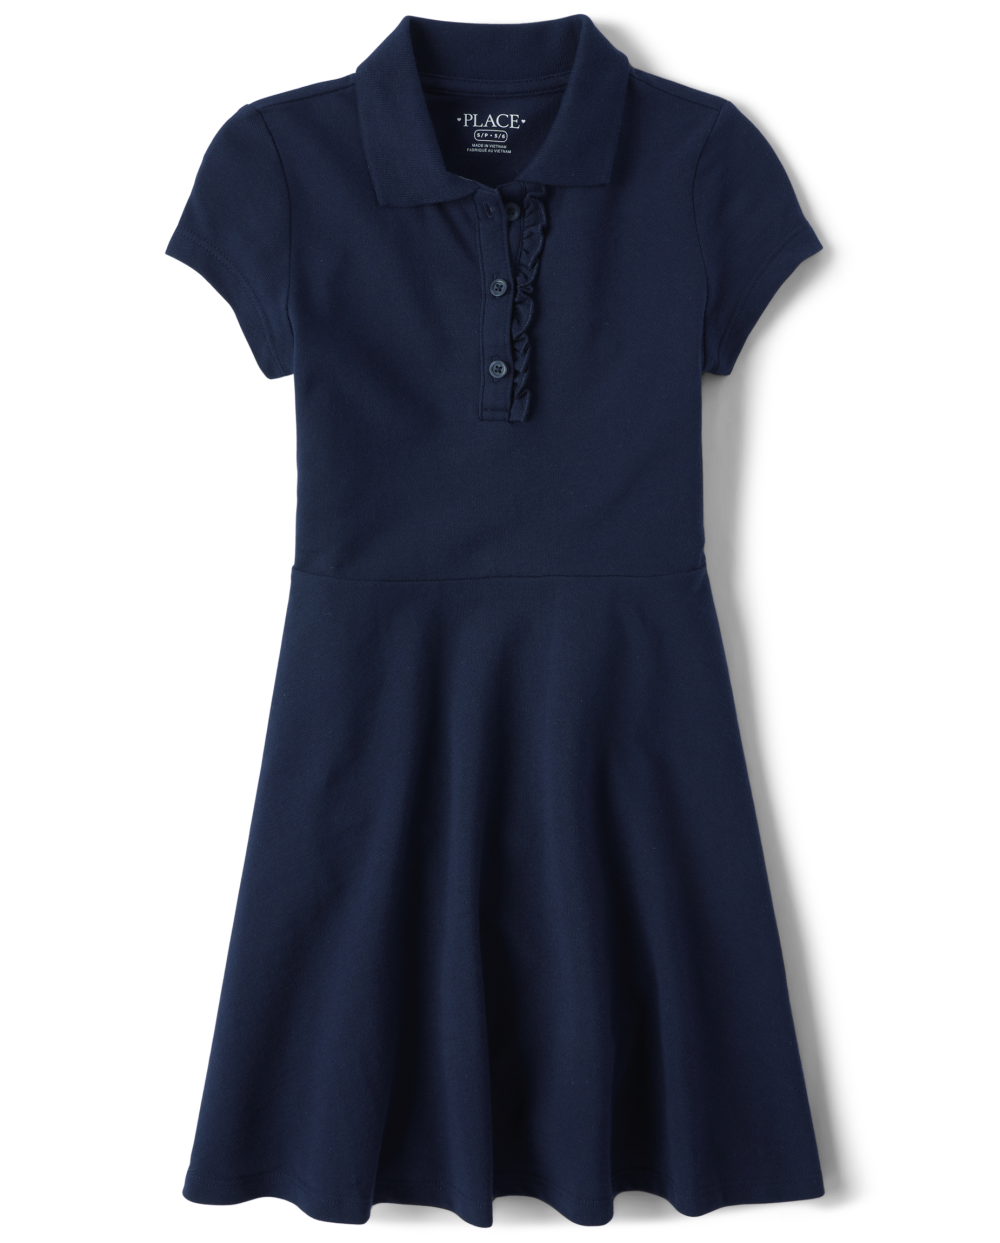 Girls Above the Knee Short Sleeves Sleeves Collared Ruffle Trim Dress